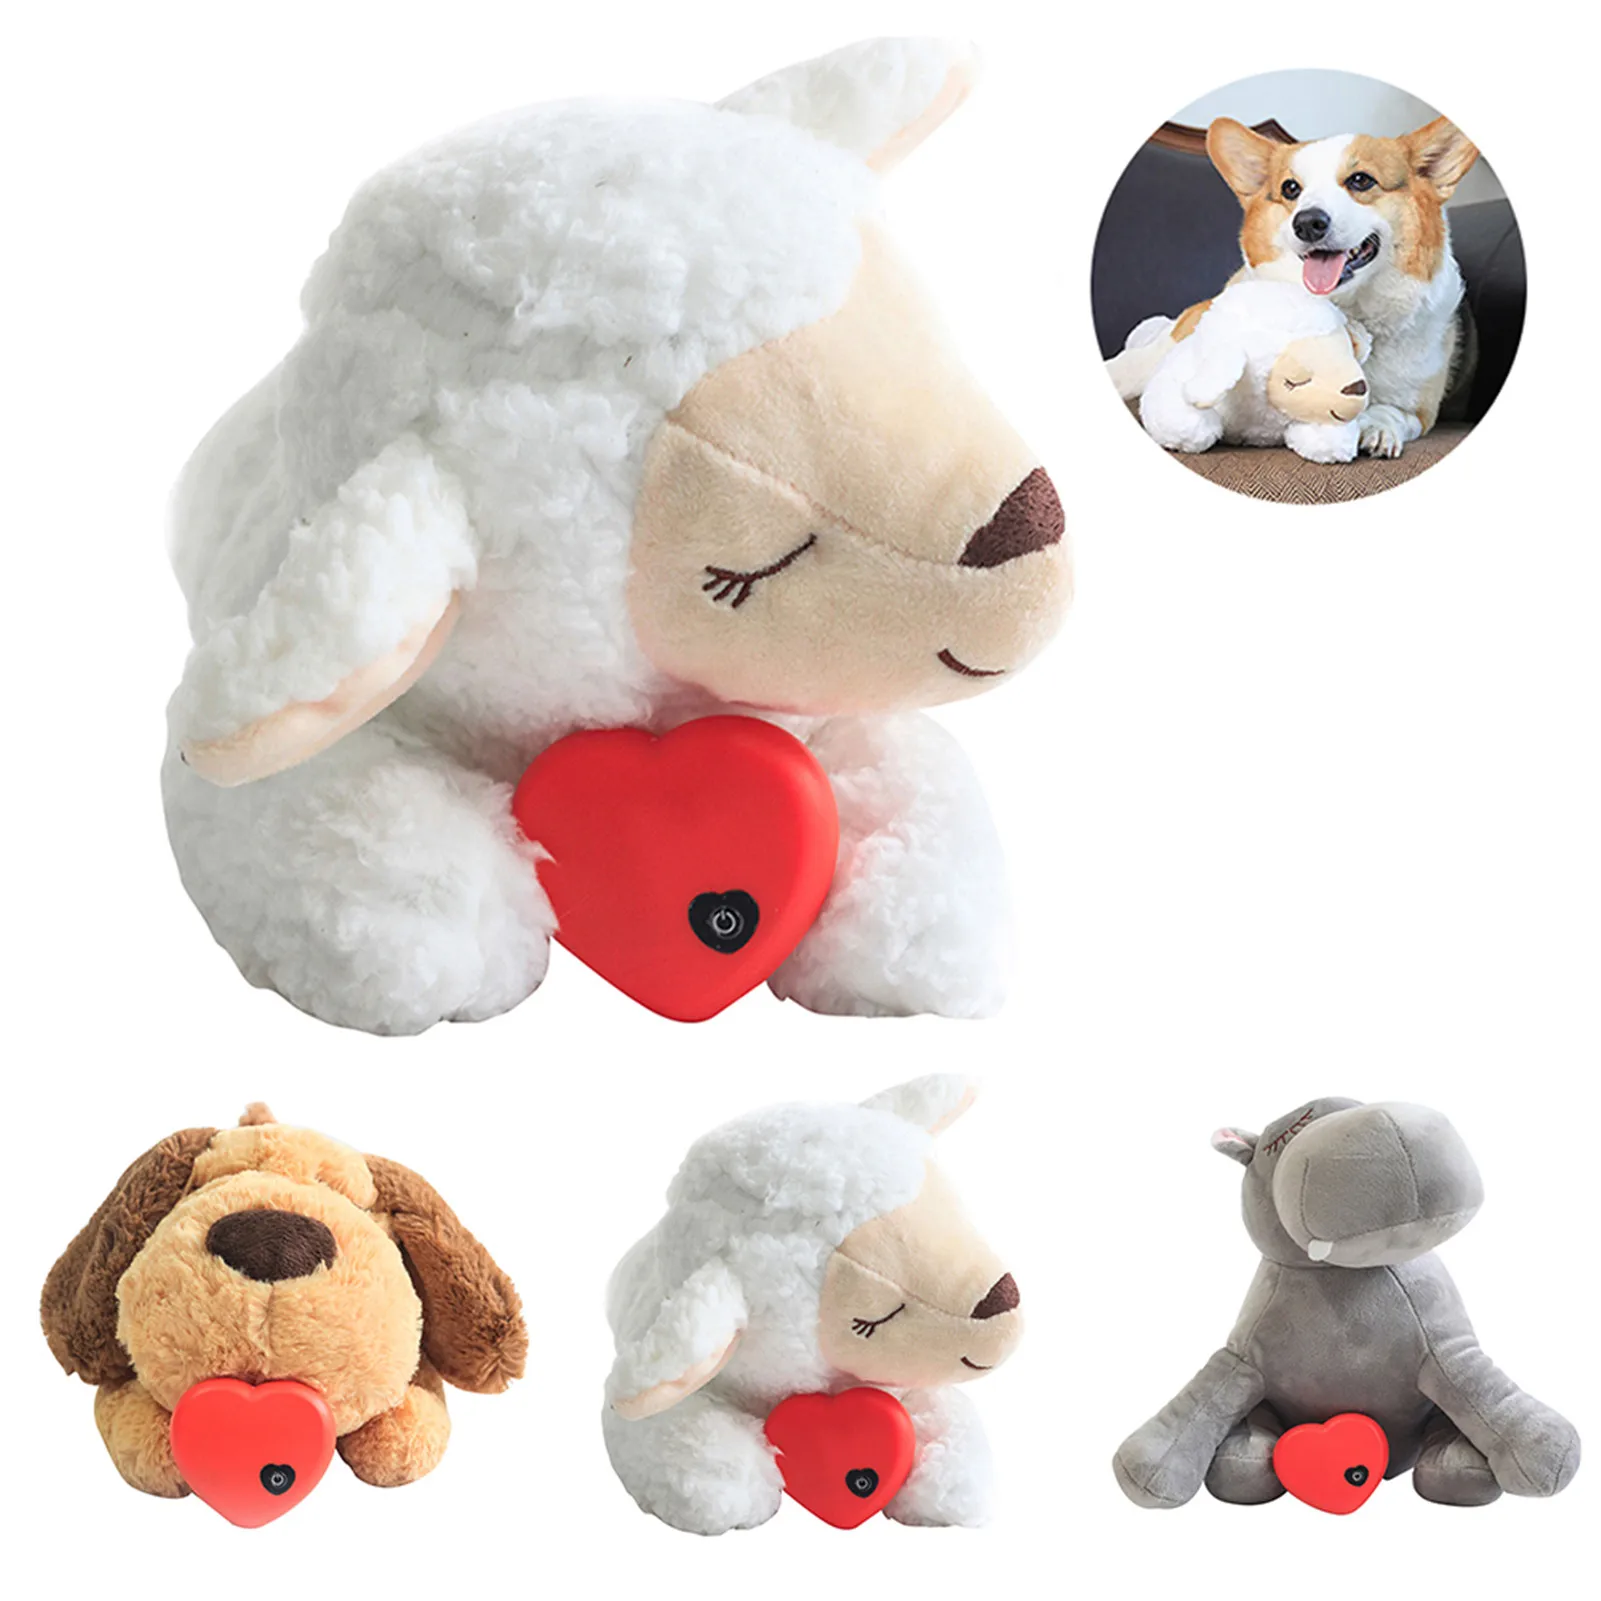 Dog Plush Toy Heartbeat Comfort Toy Accompany Sleeping Cat Toy Heart Beat Soothing Plush Doll Sleep For Smart Dogs Cats Toys